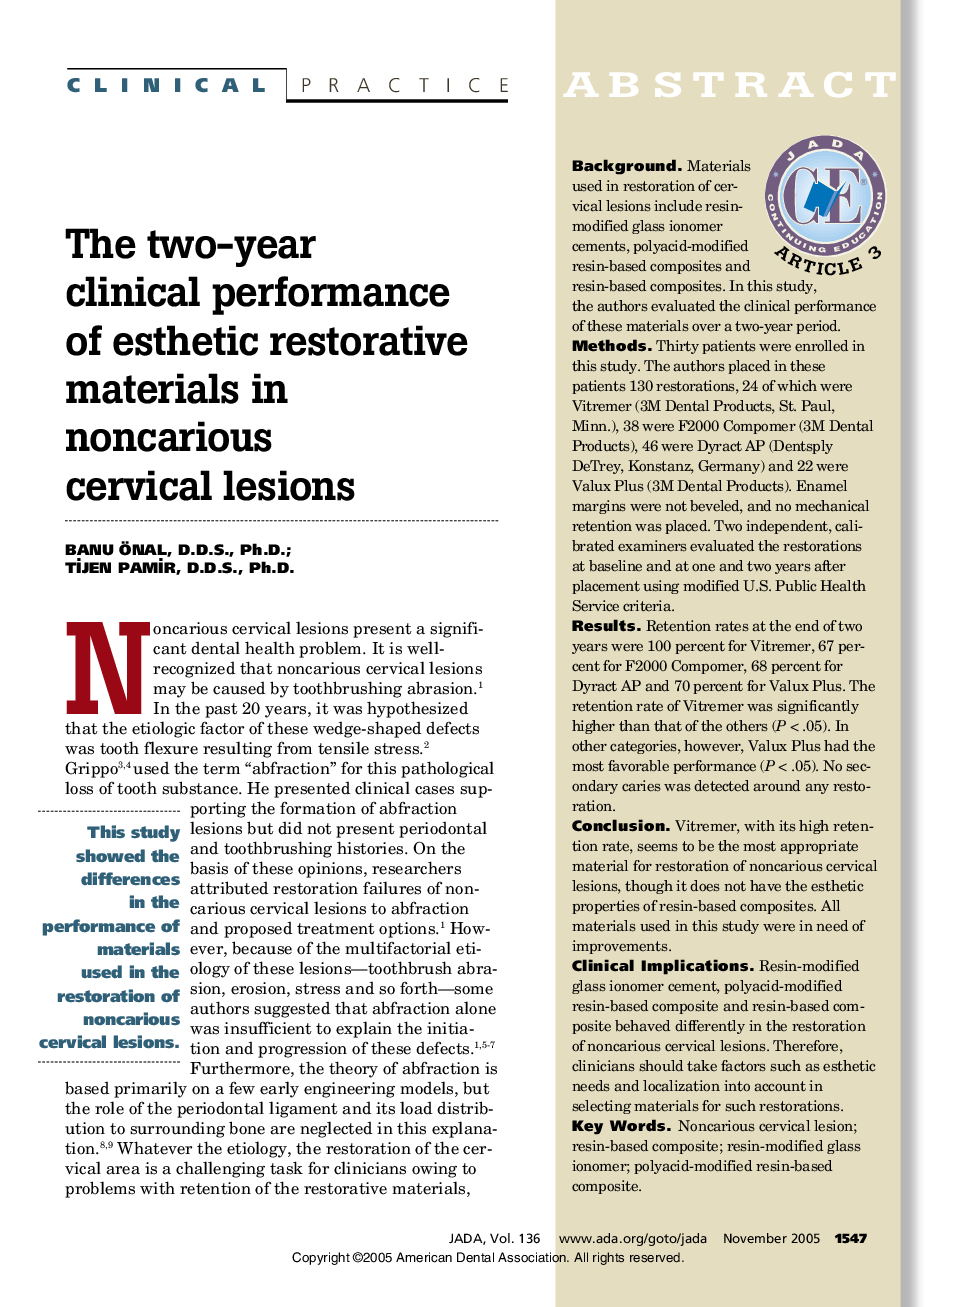 The two-year clinical performance of esthetic restorative materials in noncarious cervical lesions